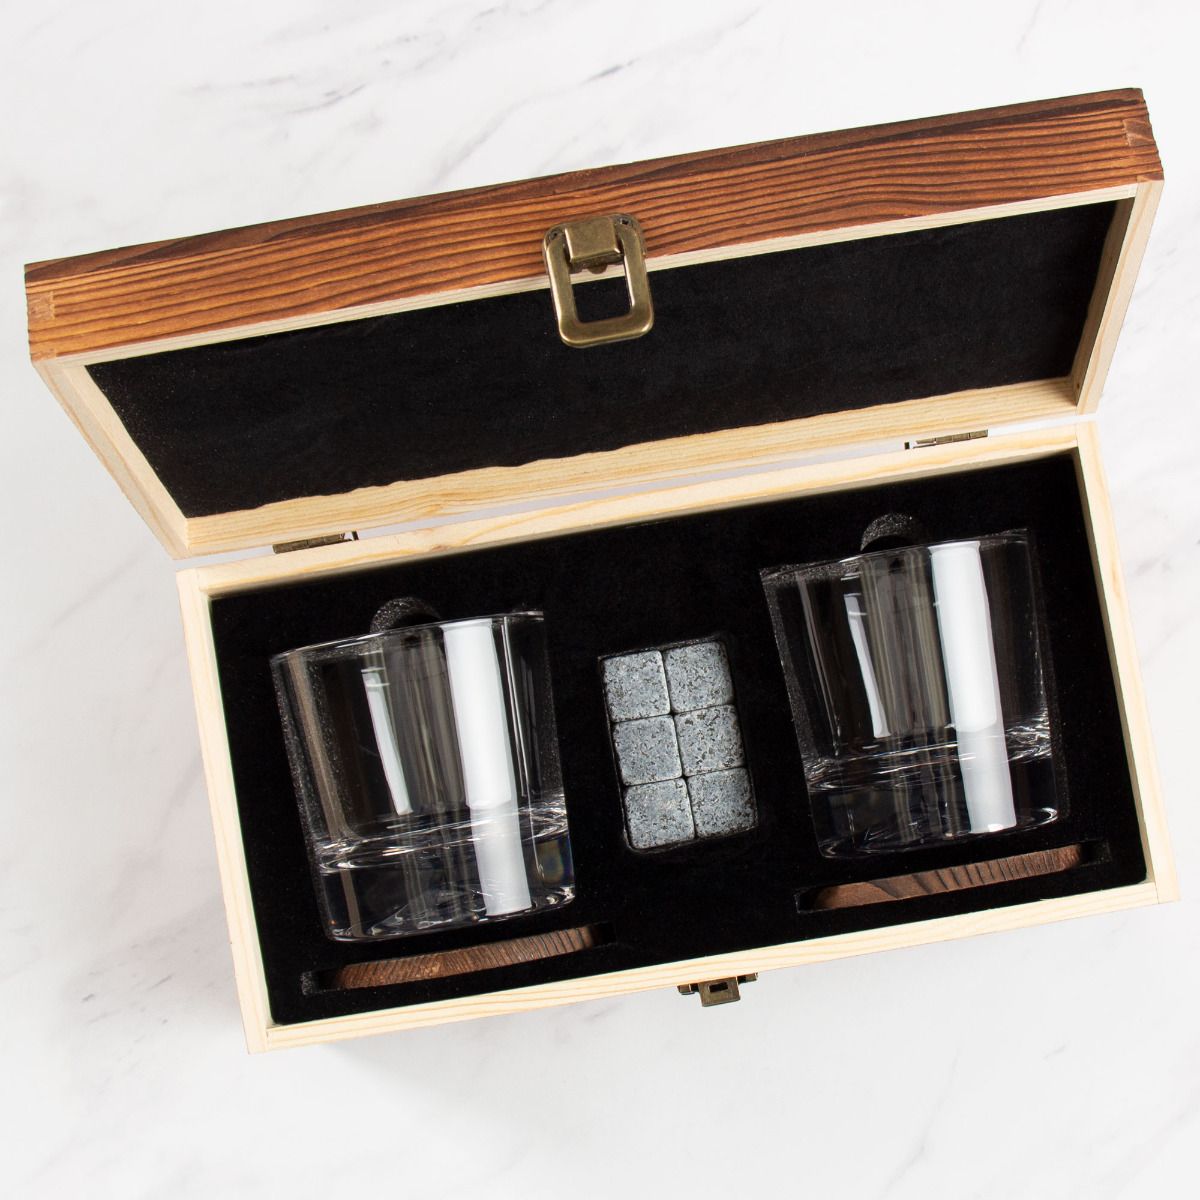 Personalized Whiskey Glass Set with Wooden Box